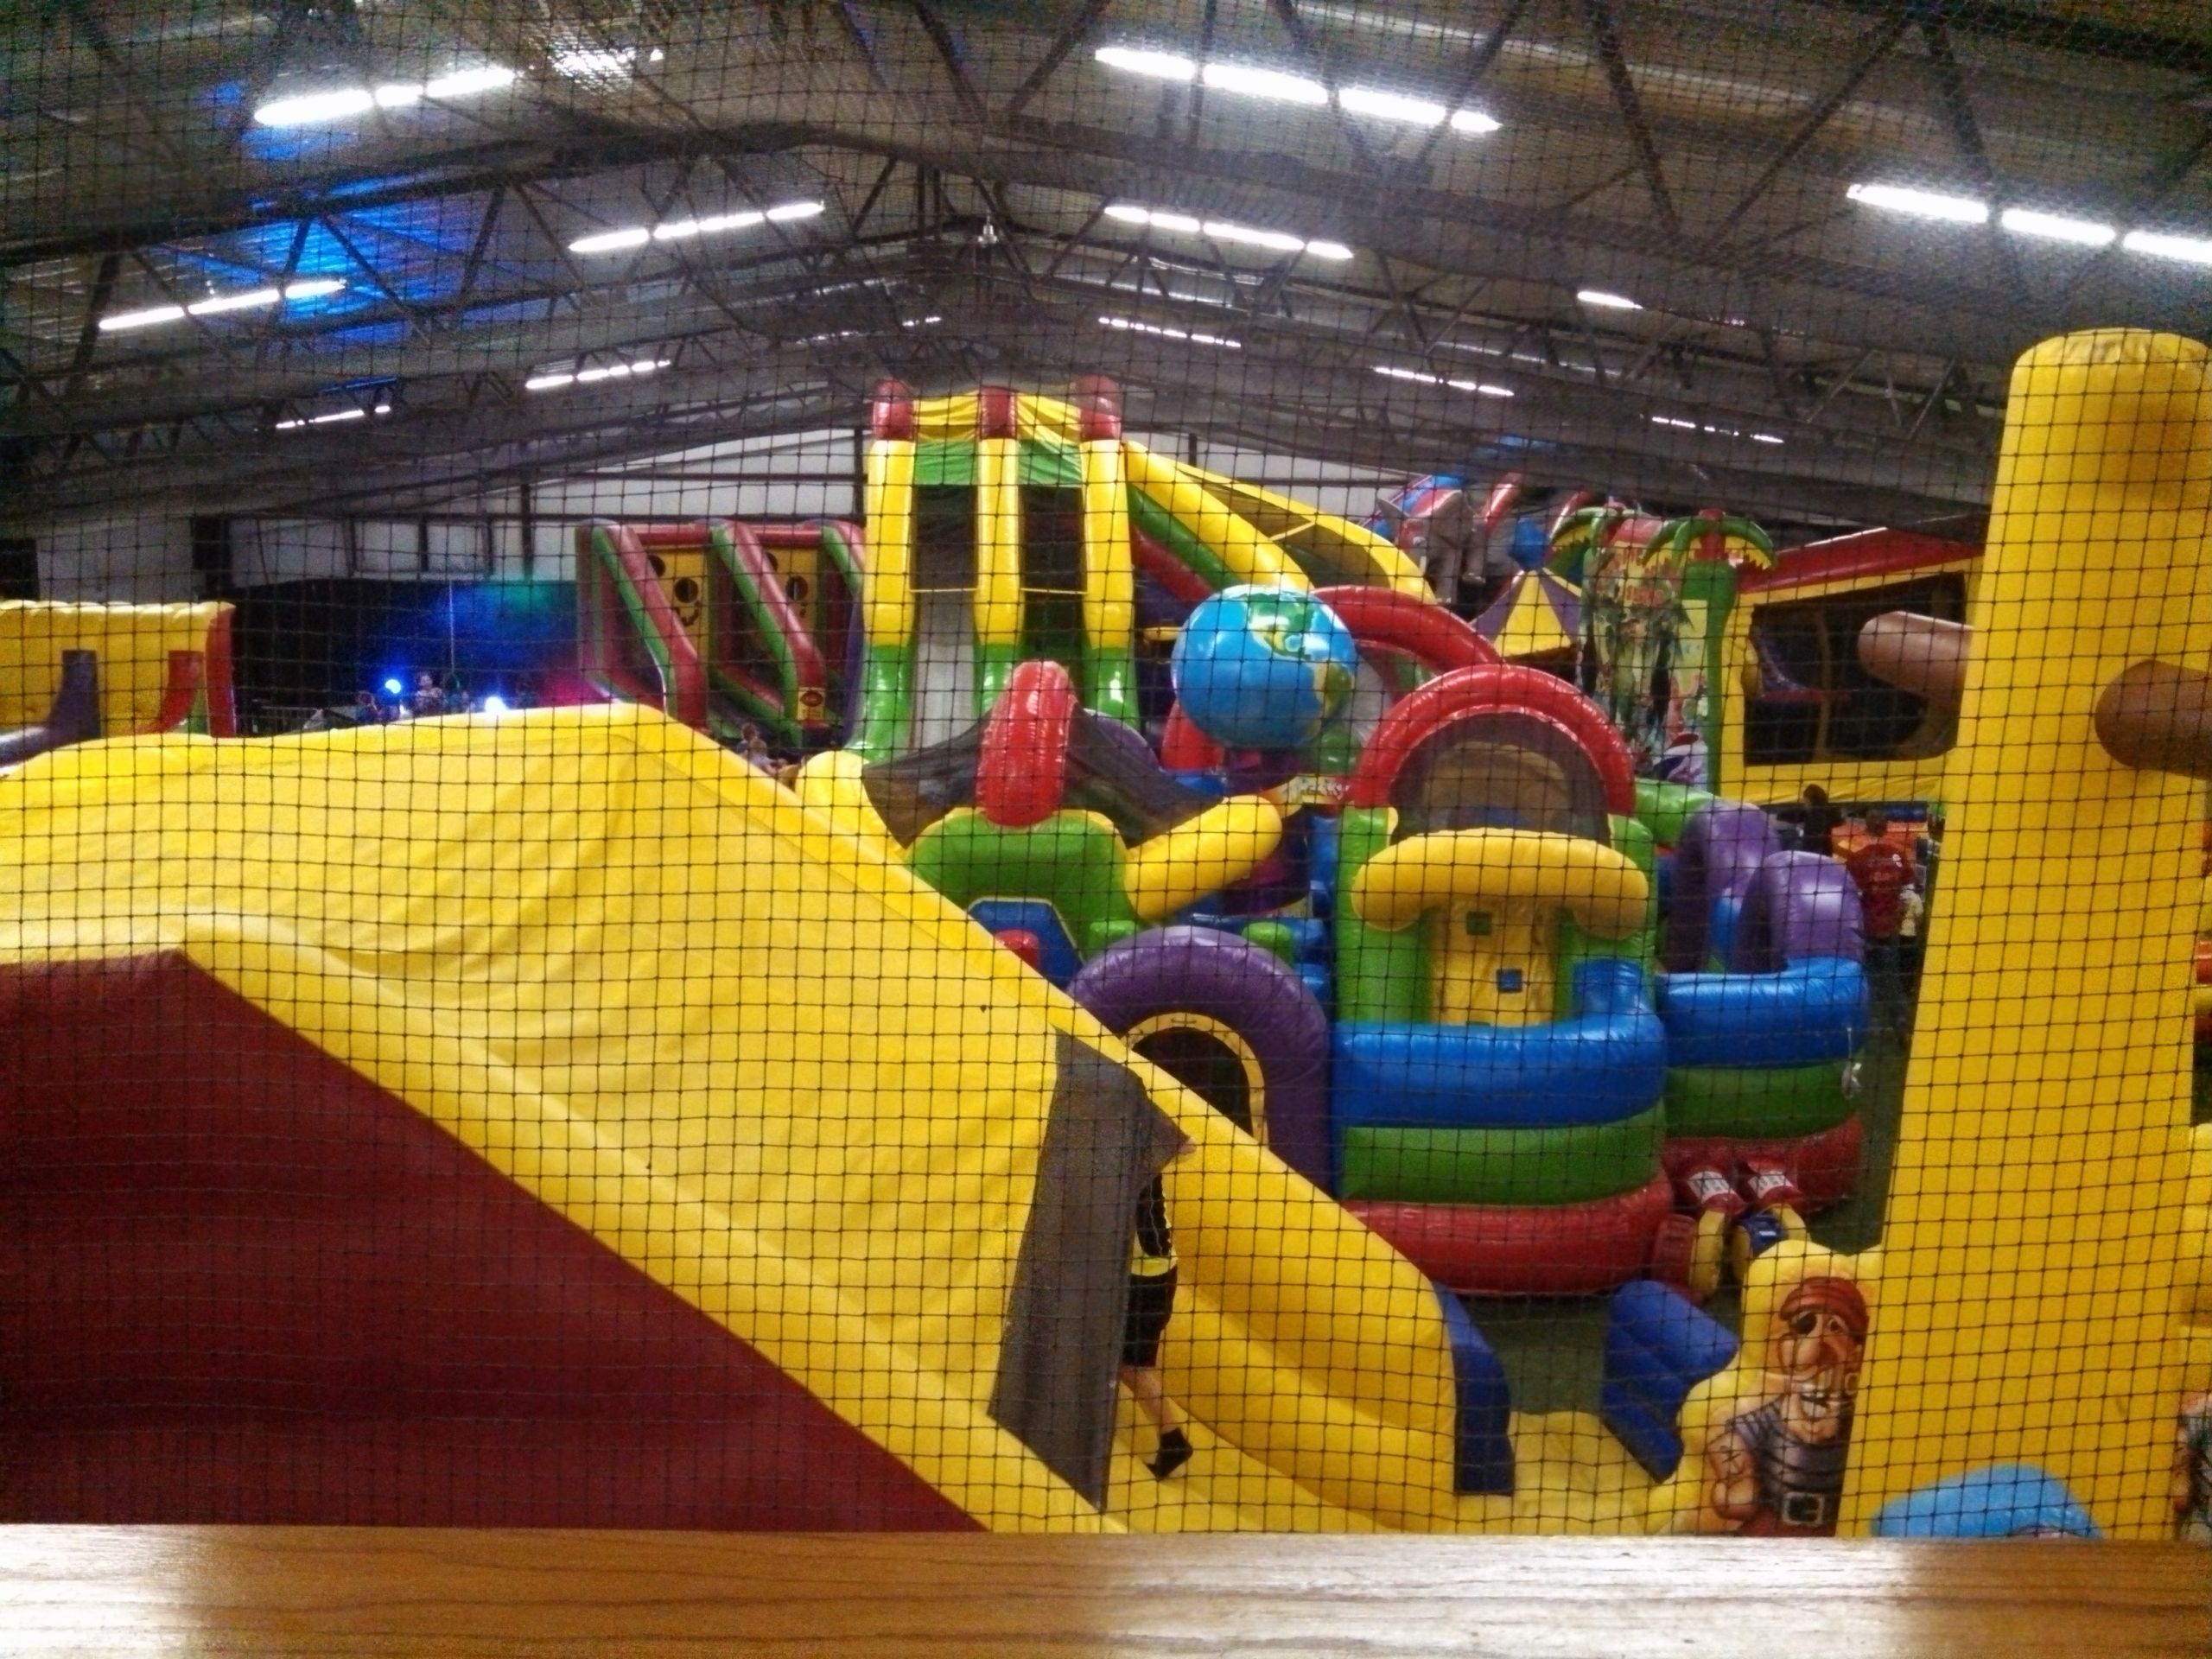 Birthday Party Rooms For Rent
 How Much Would You Pay For A Child s Birthday Party